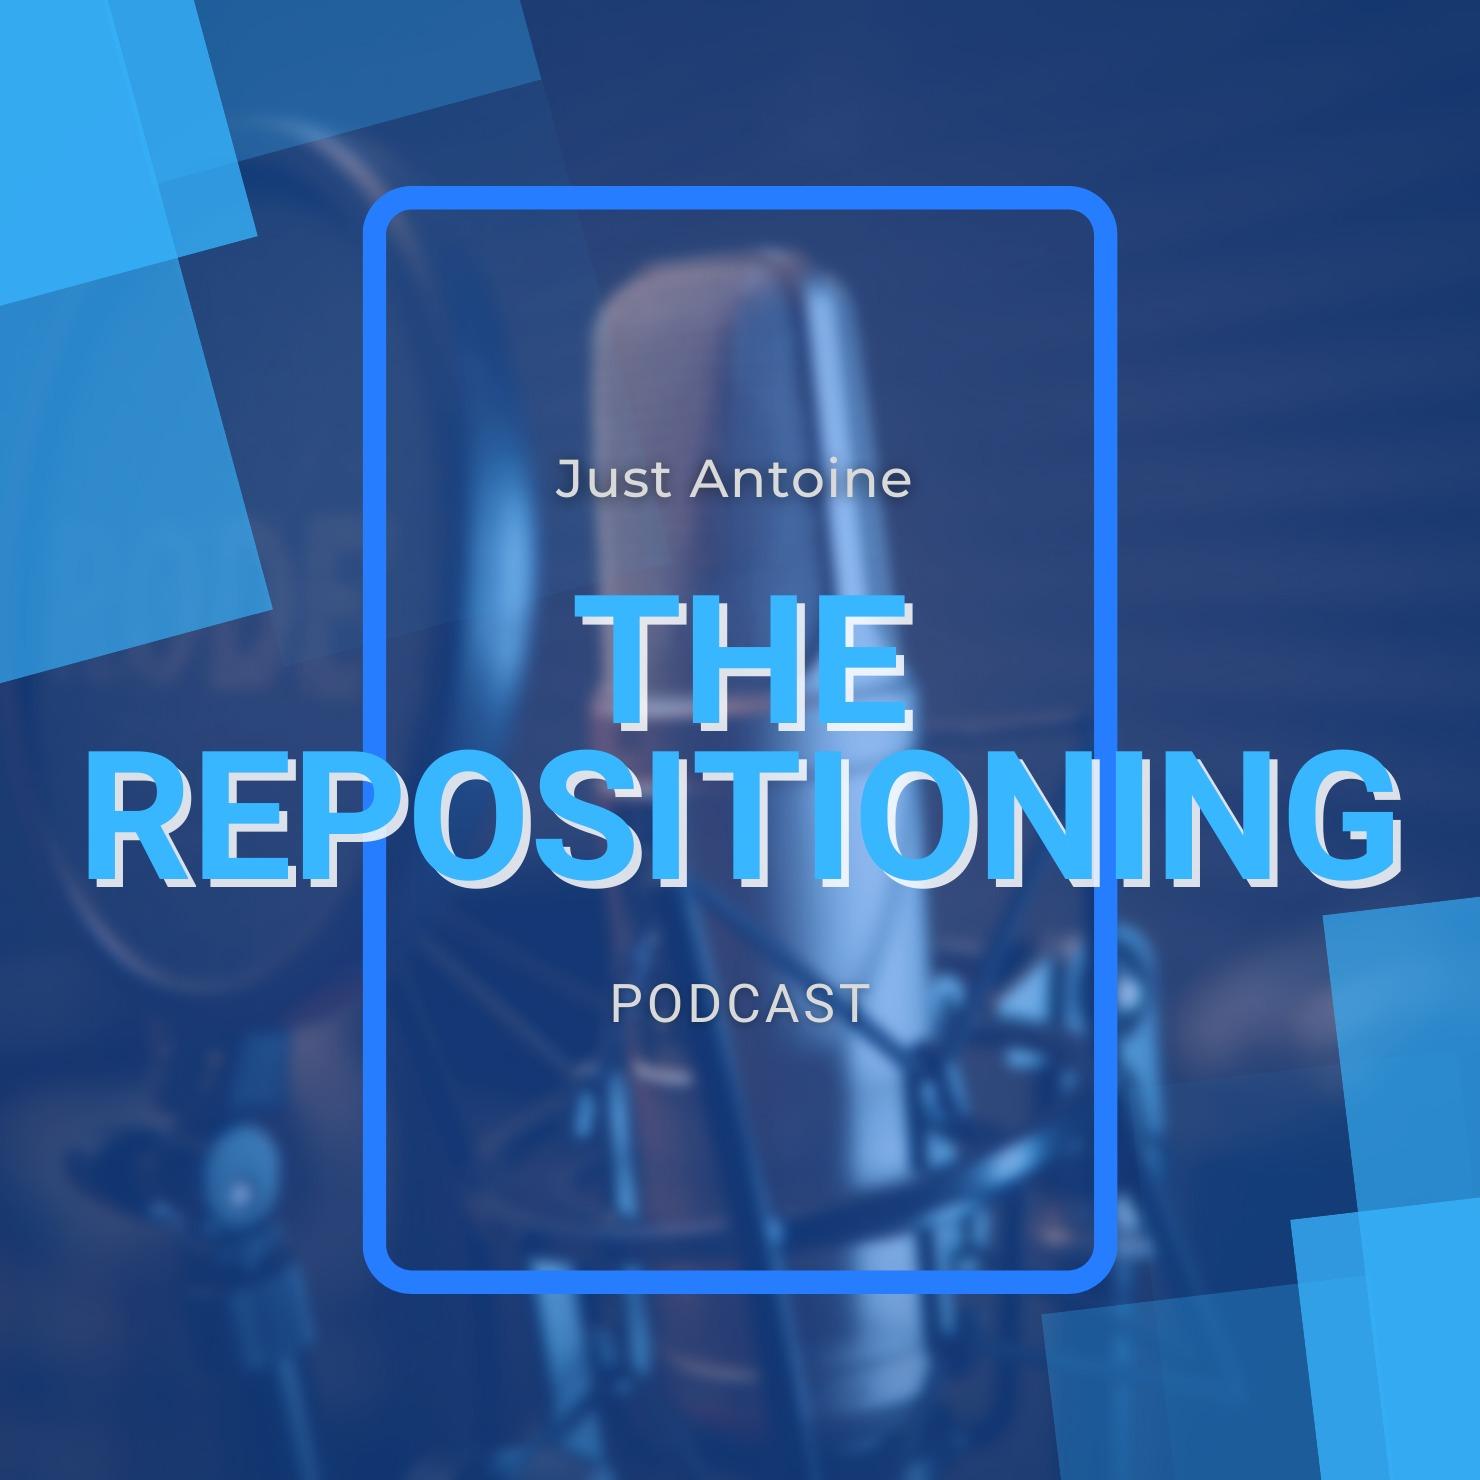 The Repositioning Podcast